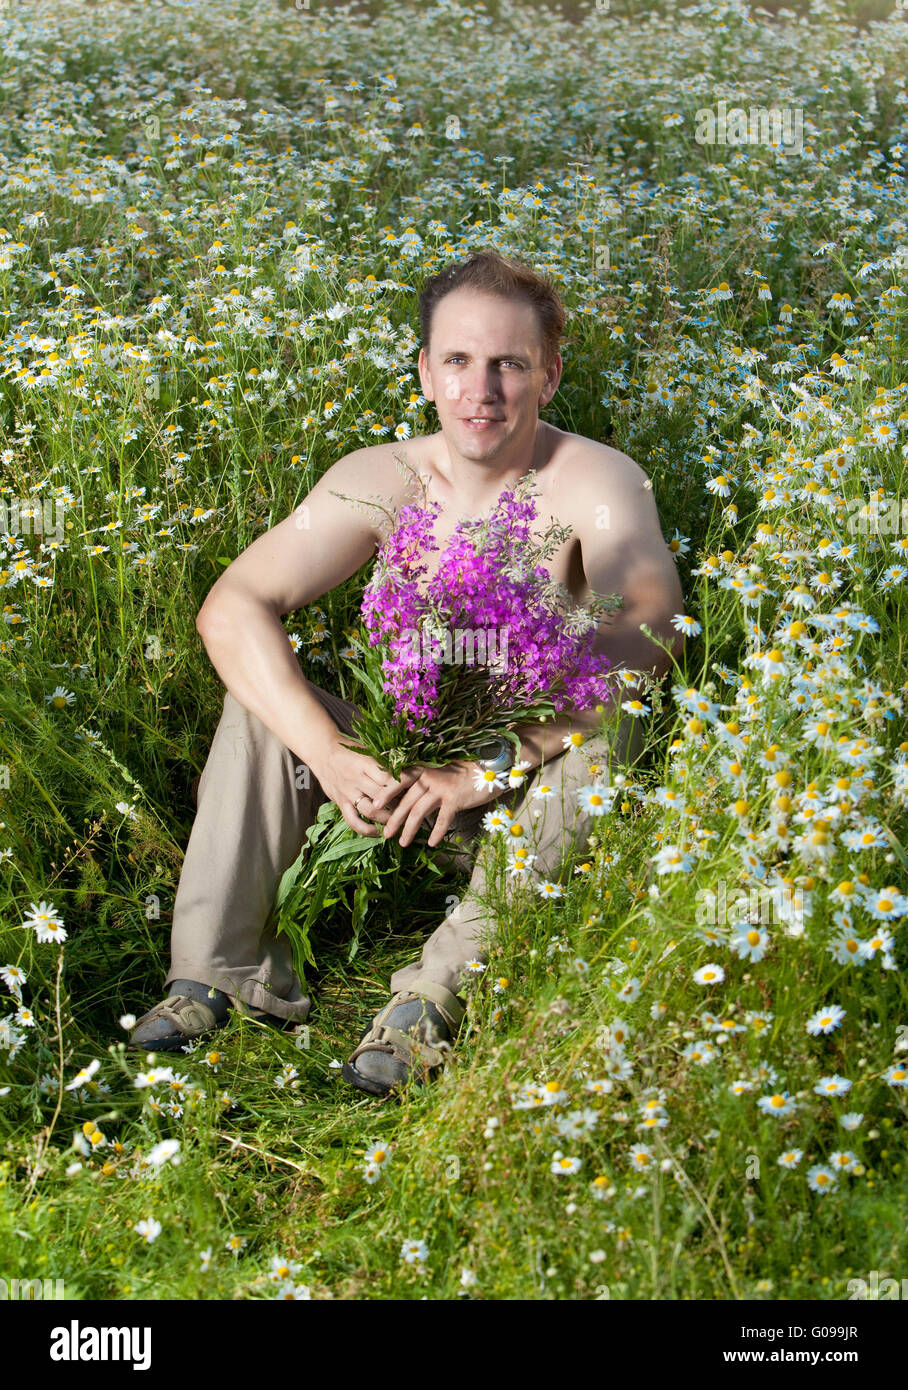 The smiling man i in the field with a bouquet Stock Photo